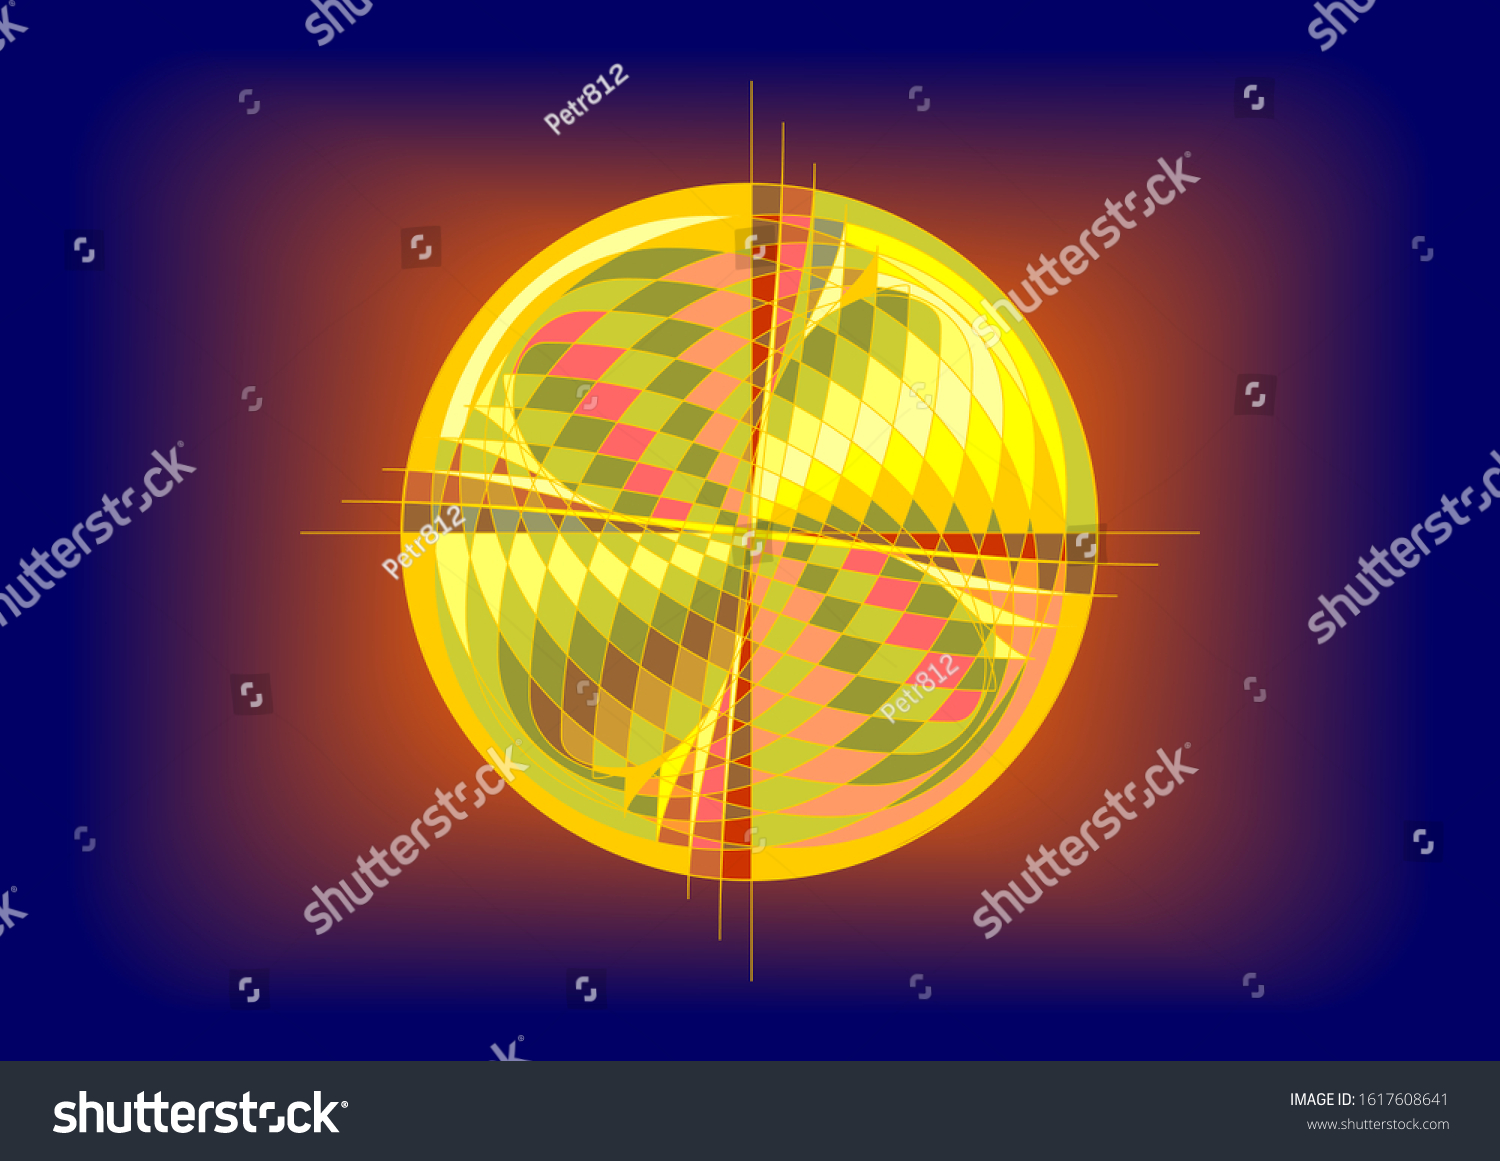 SVG of Global warming, symbolic illustration of a climate change, the stylized globe with airstreams svg